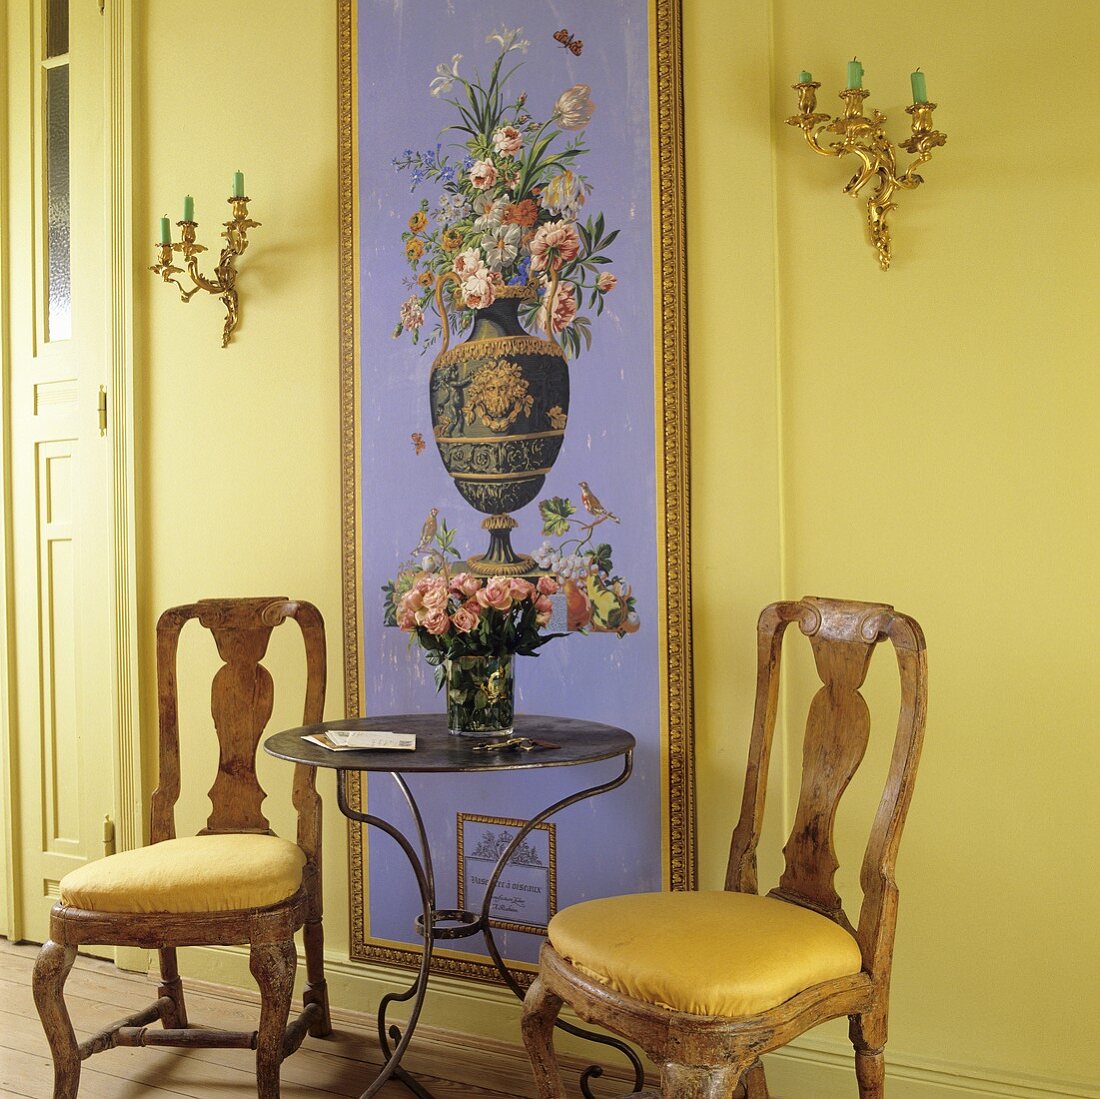 Antique wooden chairs and a side table in a hallway front of a yellow wall with a frame floral picture